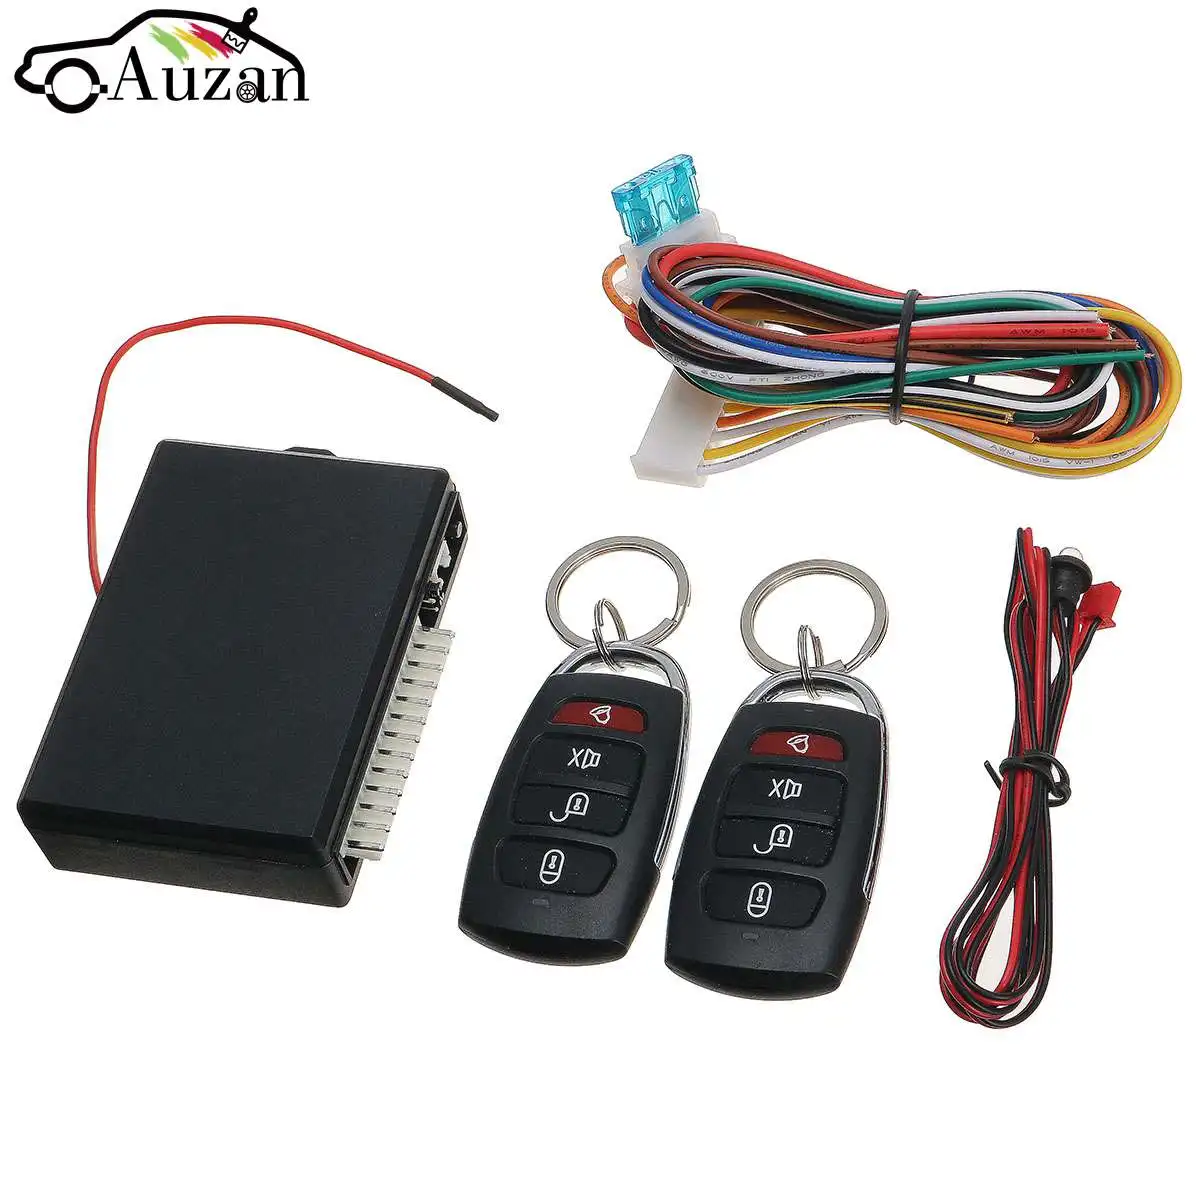 Auto Car Keyless Entry System Universal Wireless Remote Controller Kit Door Lock Vehicle Central Locking With Remote Control